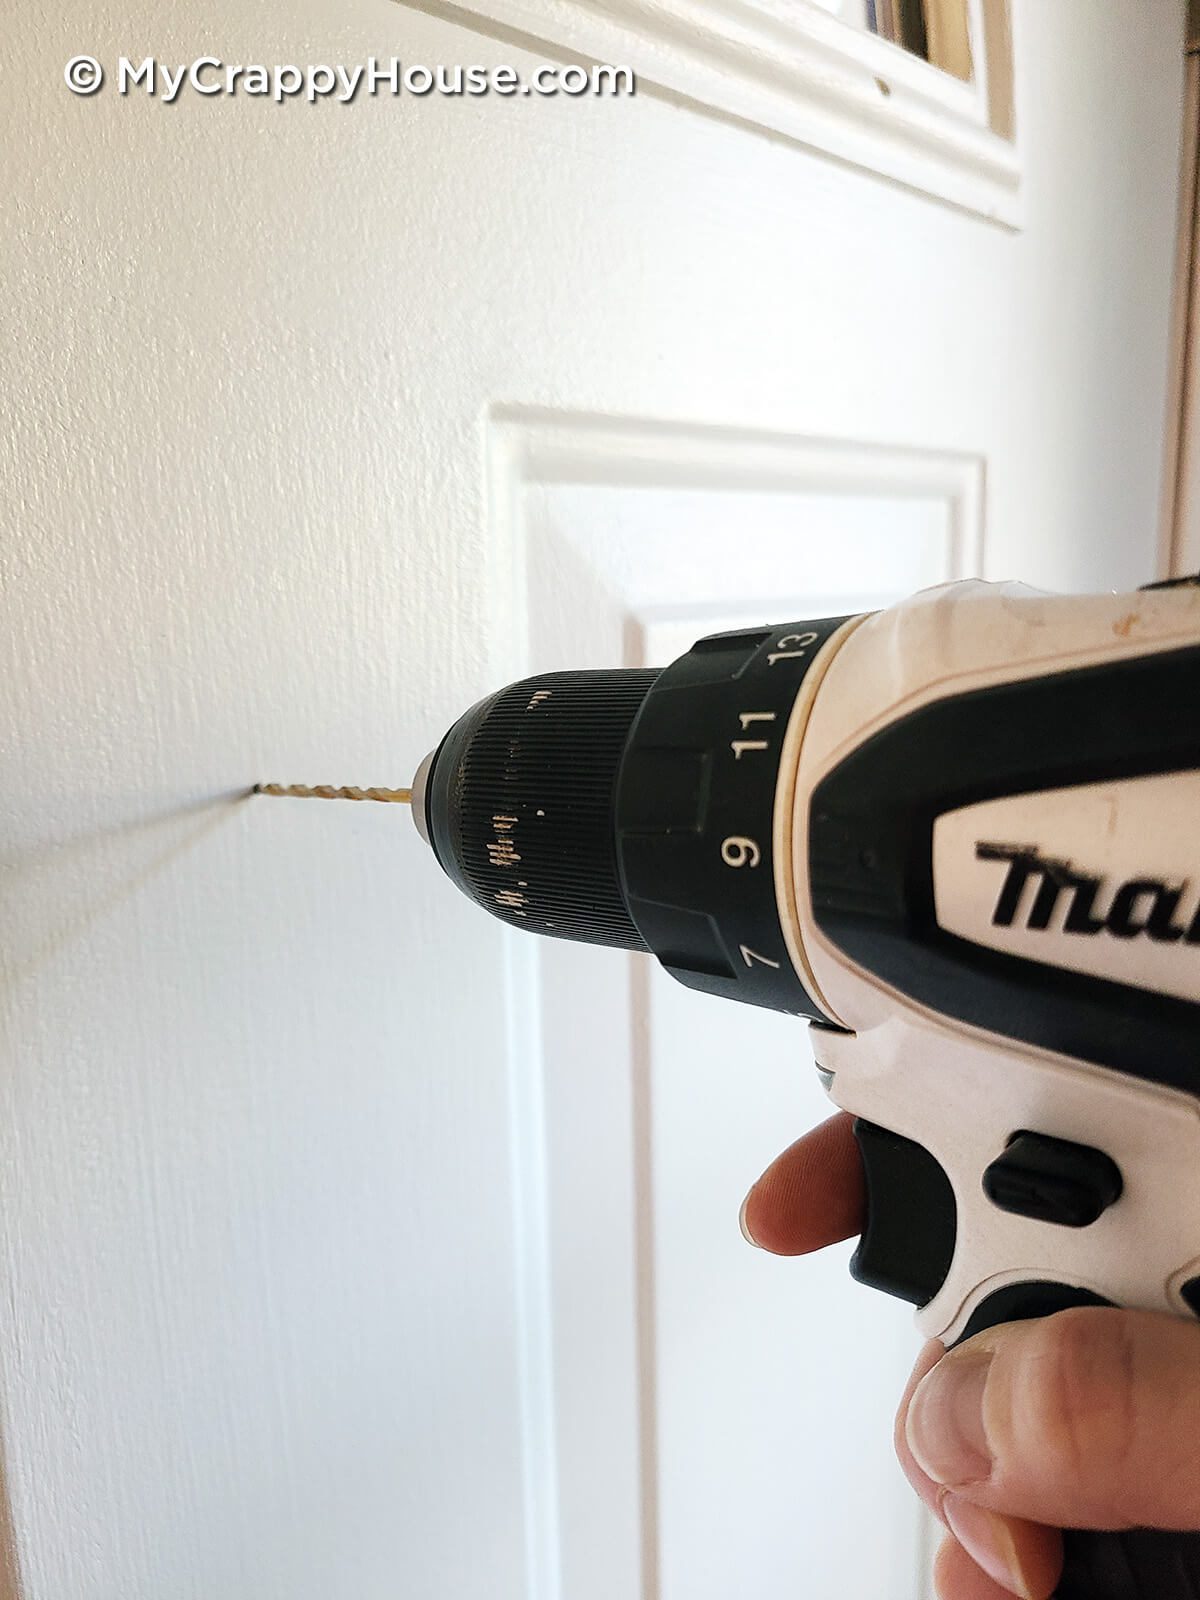 Drilling pilot hole into door to install peephole